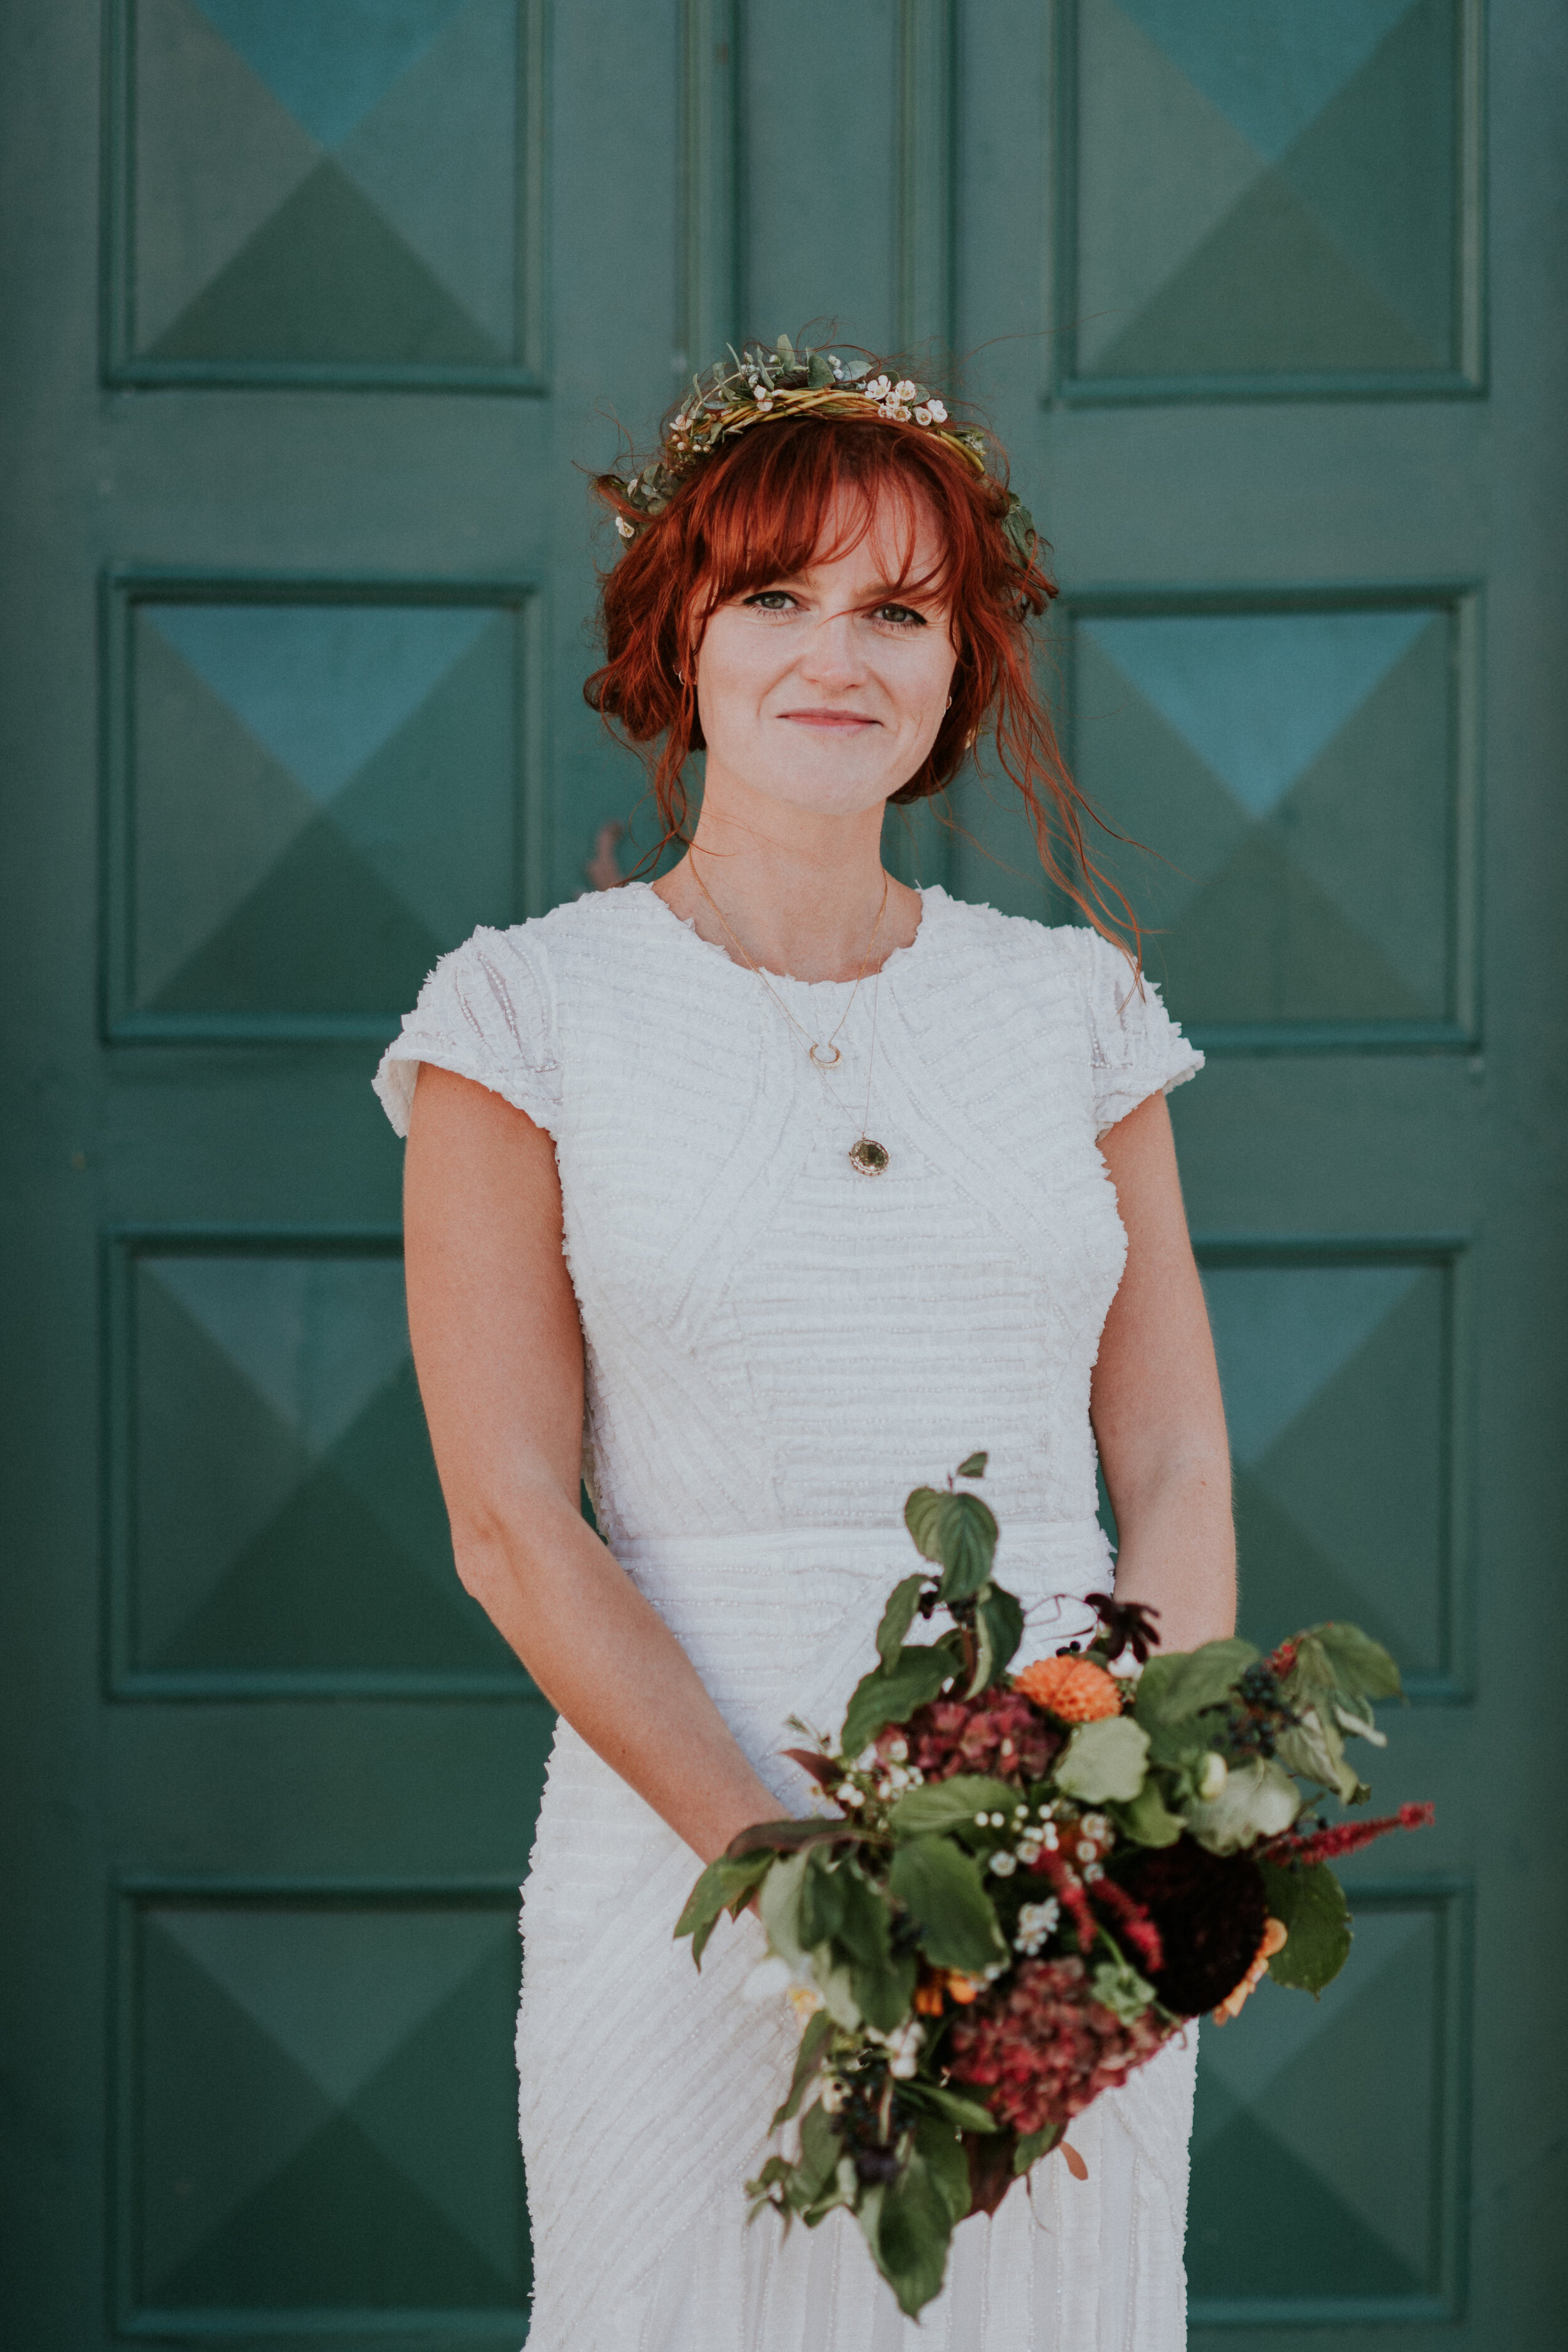 Red bridal hair | hair and makeup for brides | full-service destination wedding | get married in Denmark | Aero Island | Danish Island Weddings | Denmark wedding planners and venue